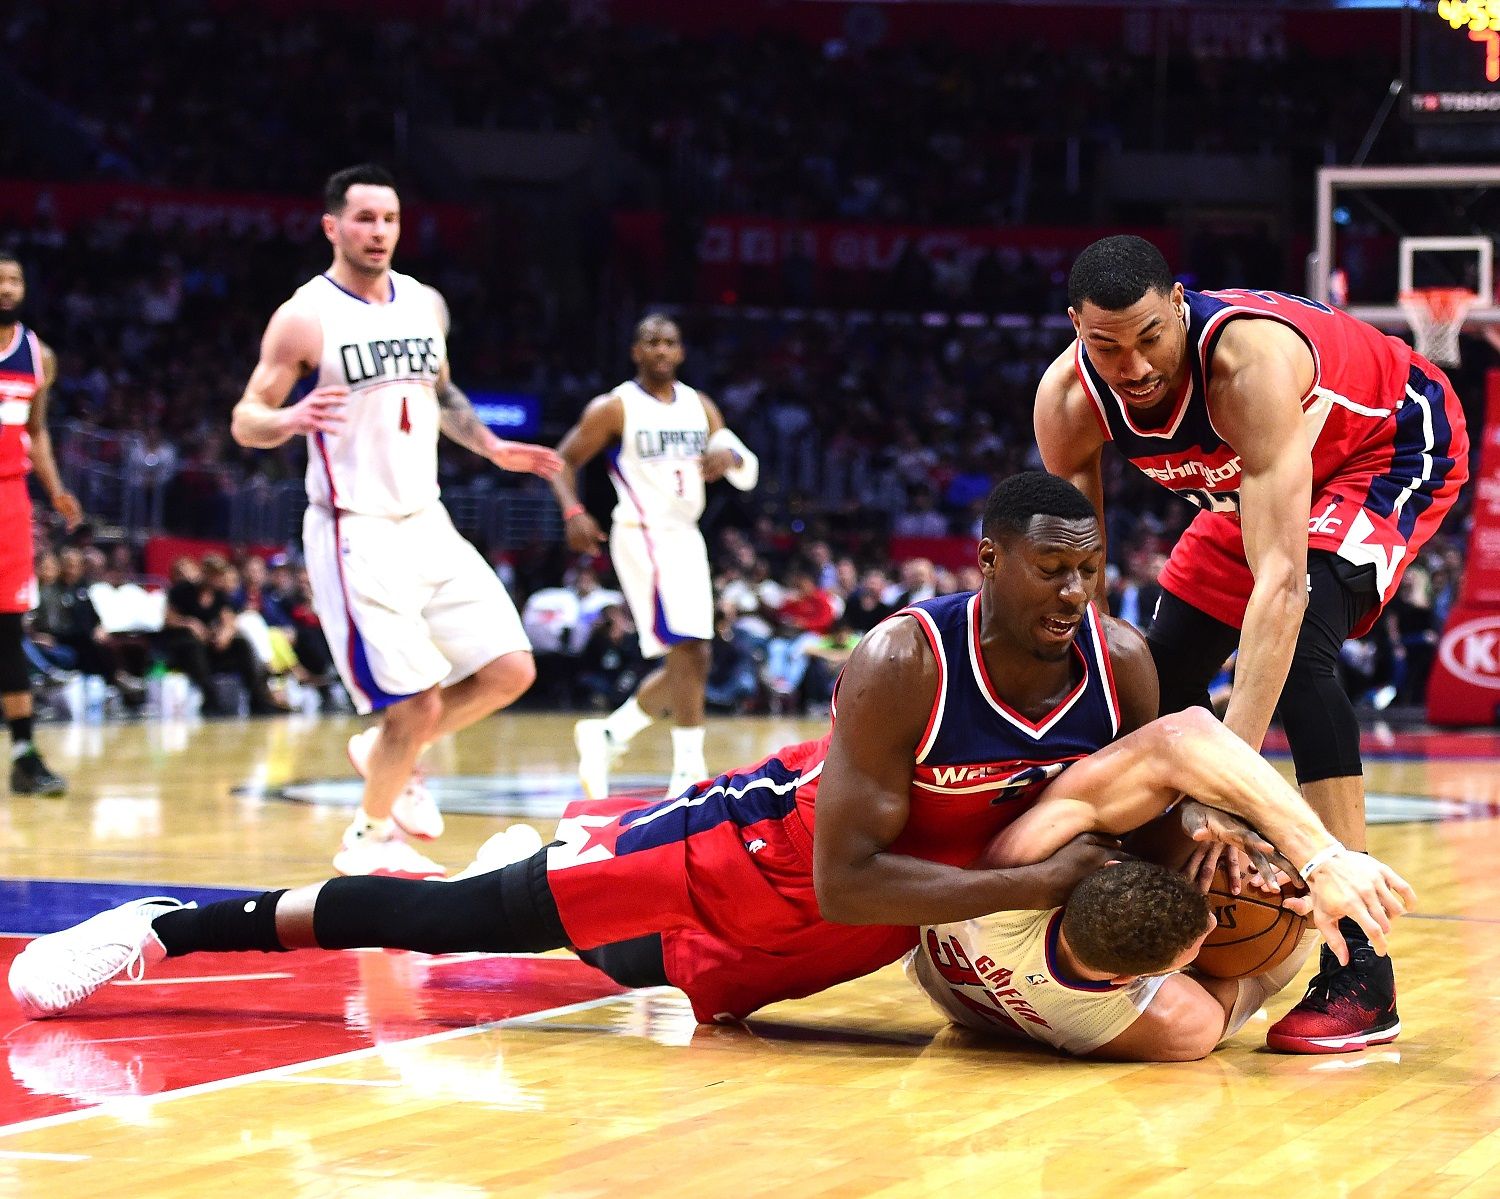 LOS ANGELES, CA - MARCH 29:  Ian Mahinmi #28 and Otto Porter Jr. #22 of the Washington Wizards surround Blake Griffin #32 of the LA Clippers on the floor during a 133-124 Clipper win at Staples Center on March 29, 2017 in Los Angeles, California.  NOTE TO USER: User expressly acknowledges and agrees that, by downloading and or using this photograph, User is consenting to the terms and conditions of the Getty Images License Agreement.  (Photo by Harry How/Getty Images)